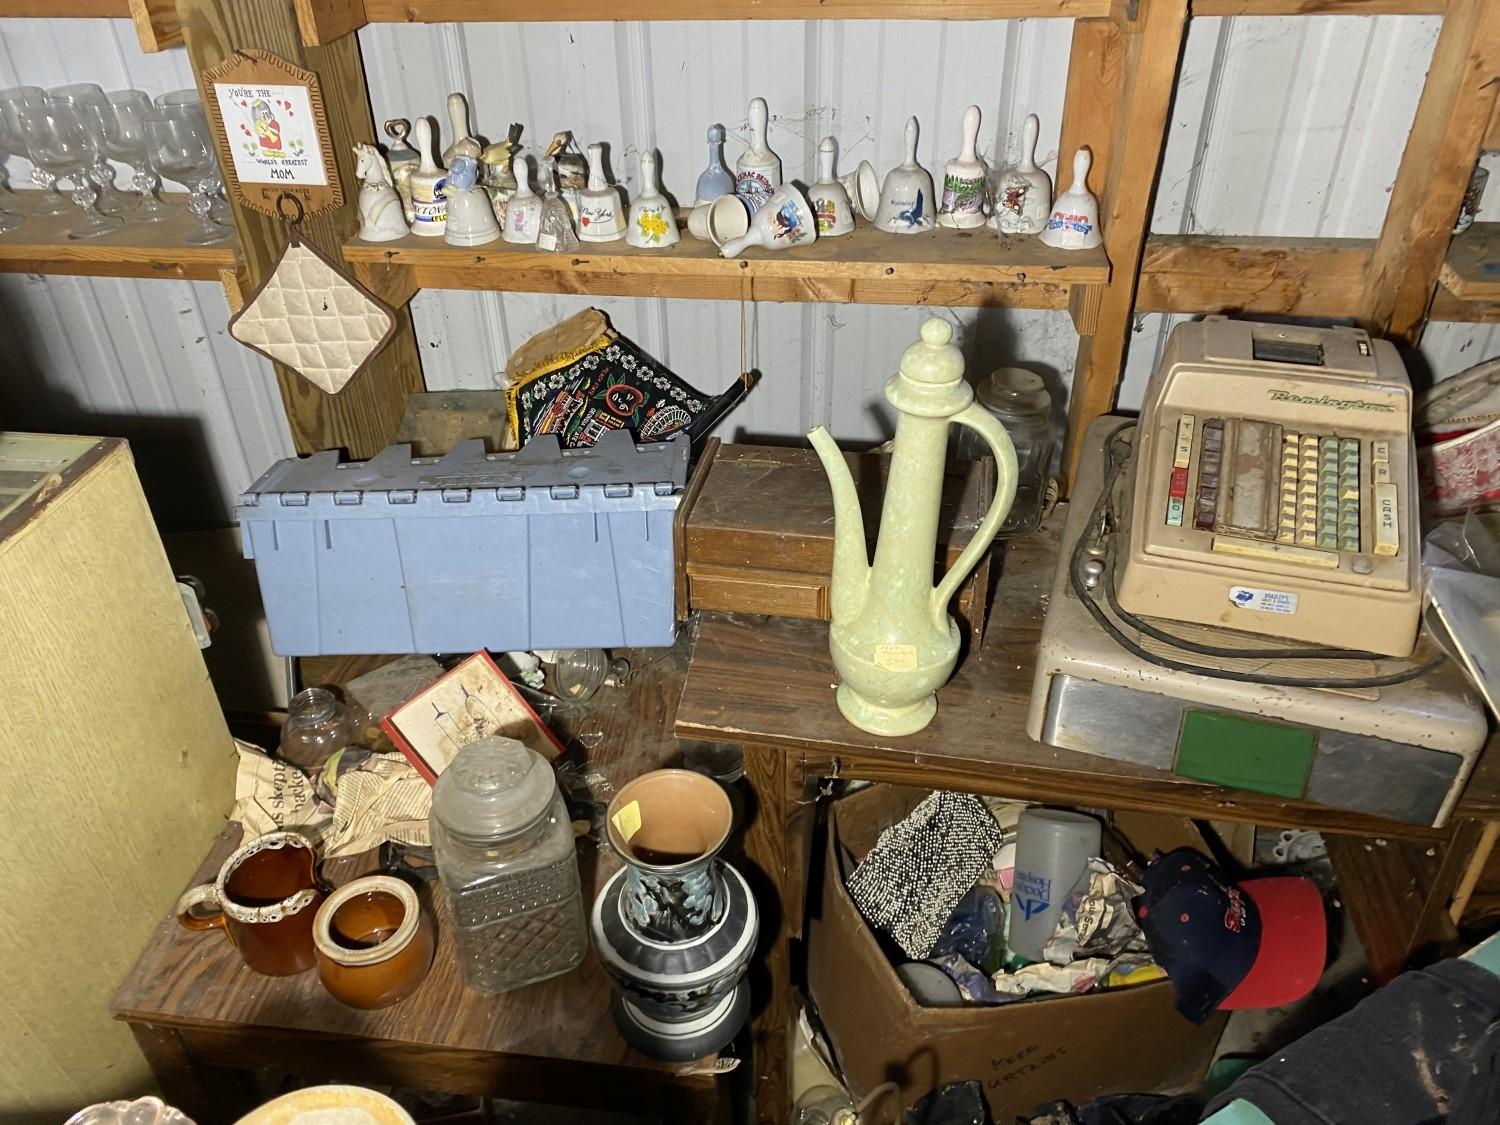 Large lot of vintage along wall